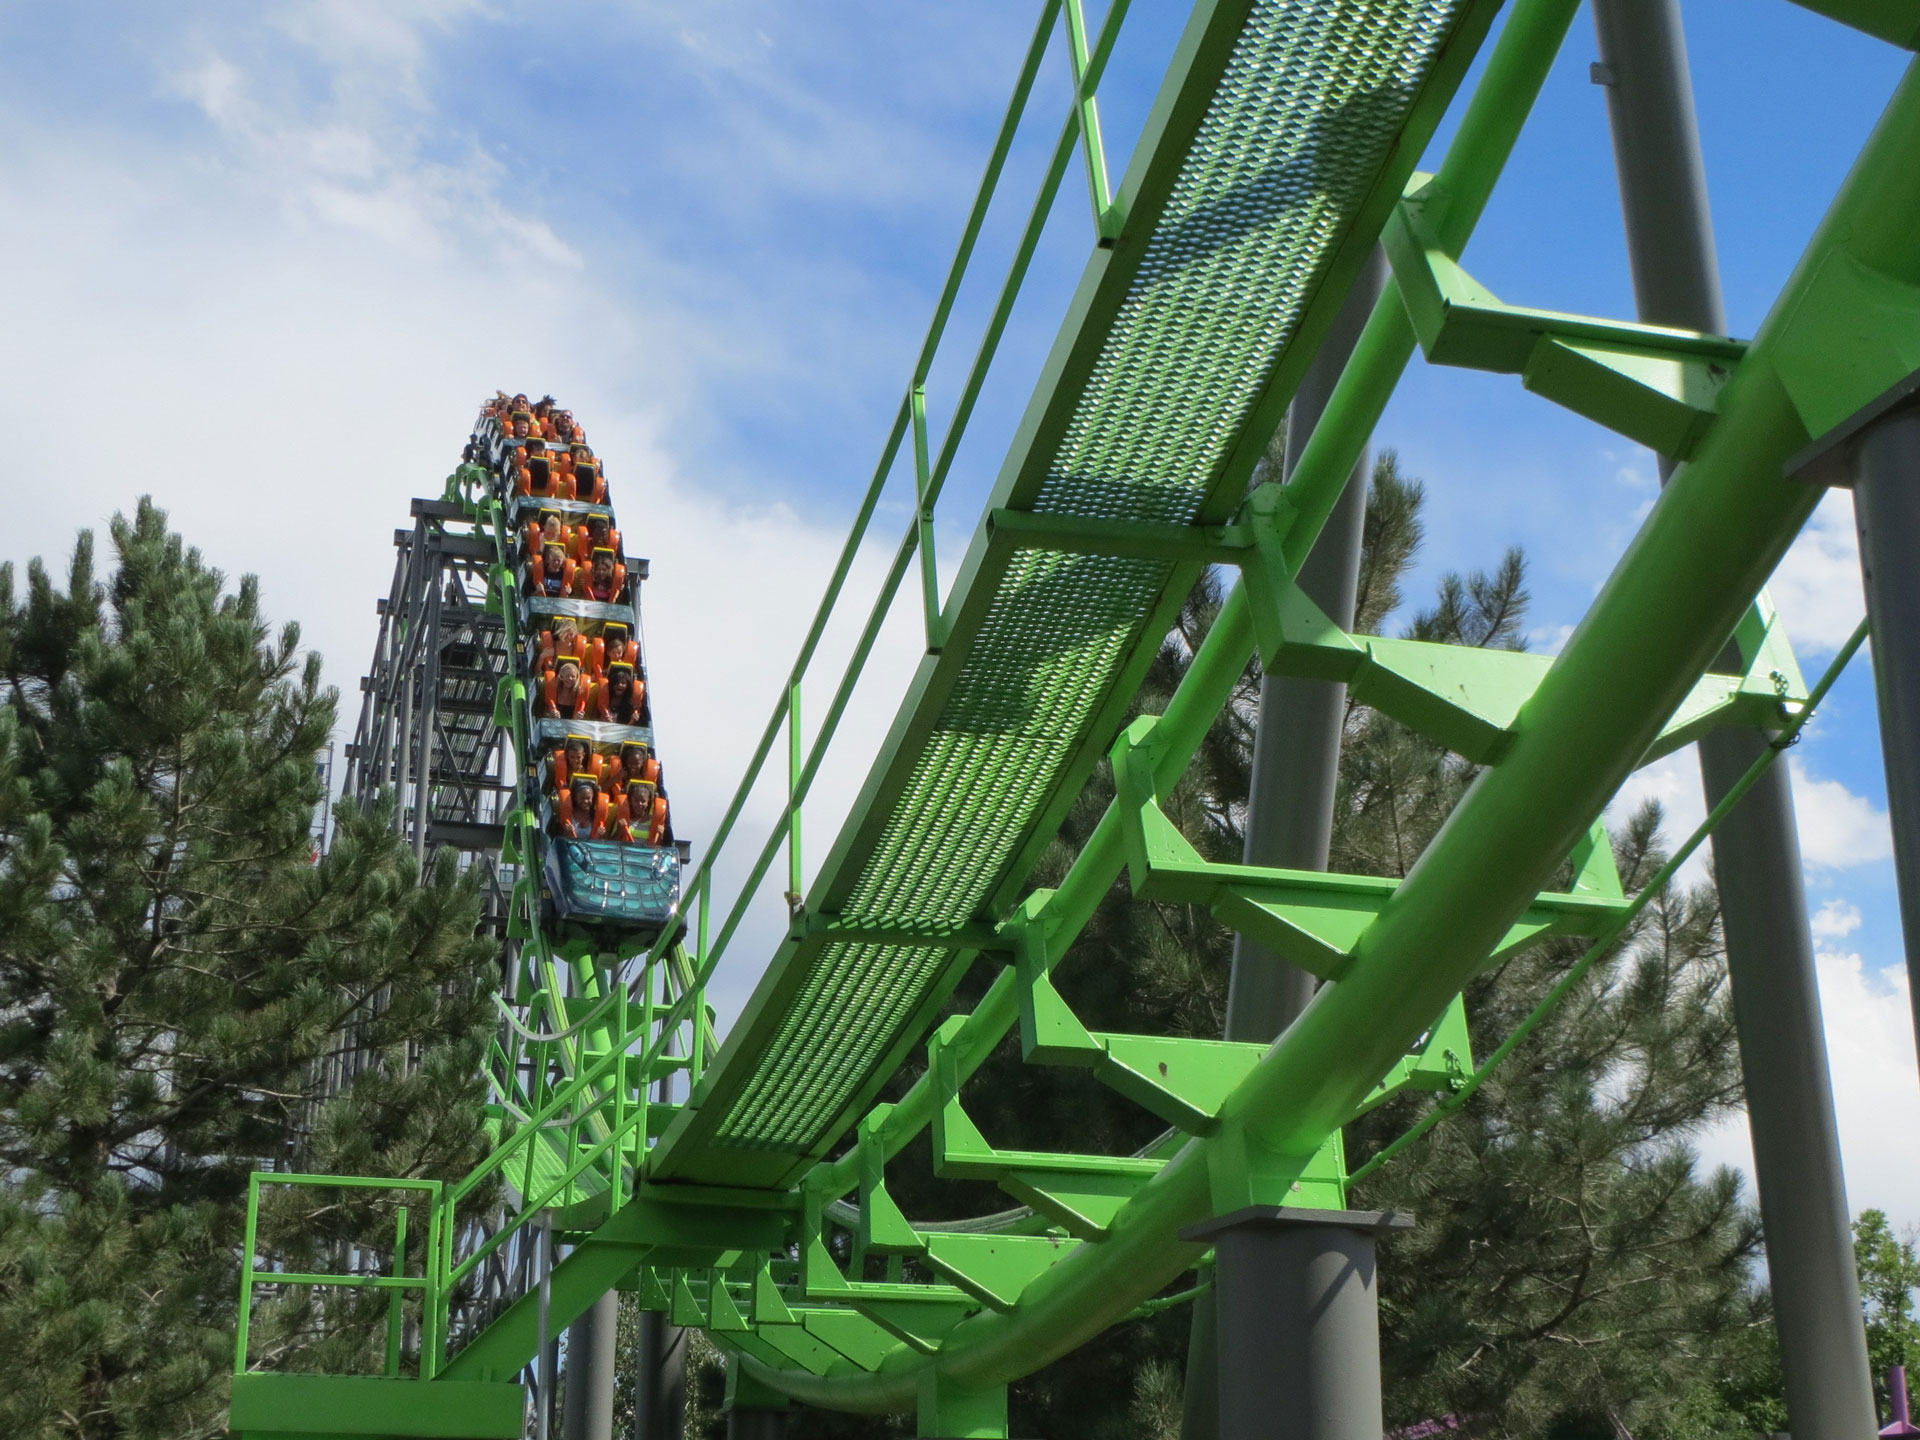 Catapult Launch Coasters Coasterforce